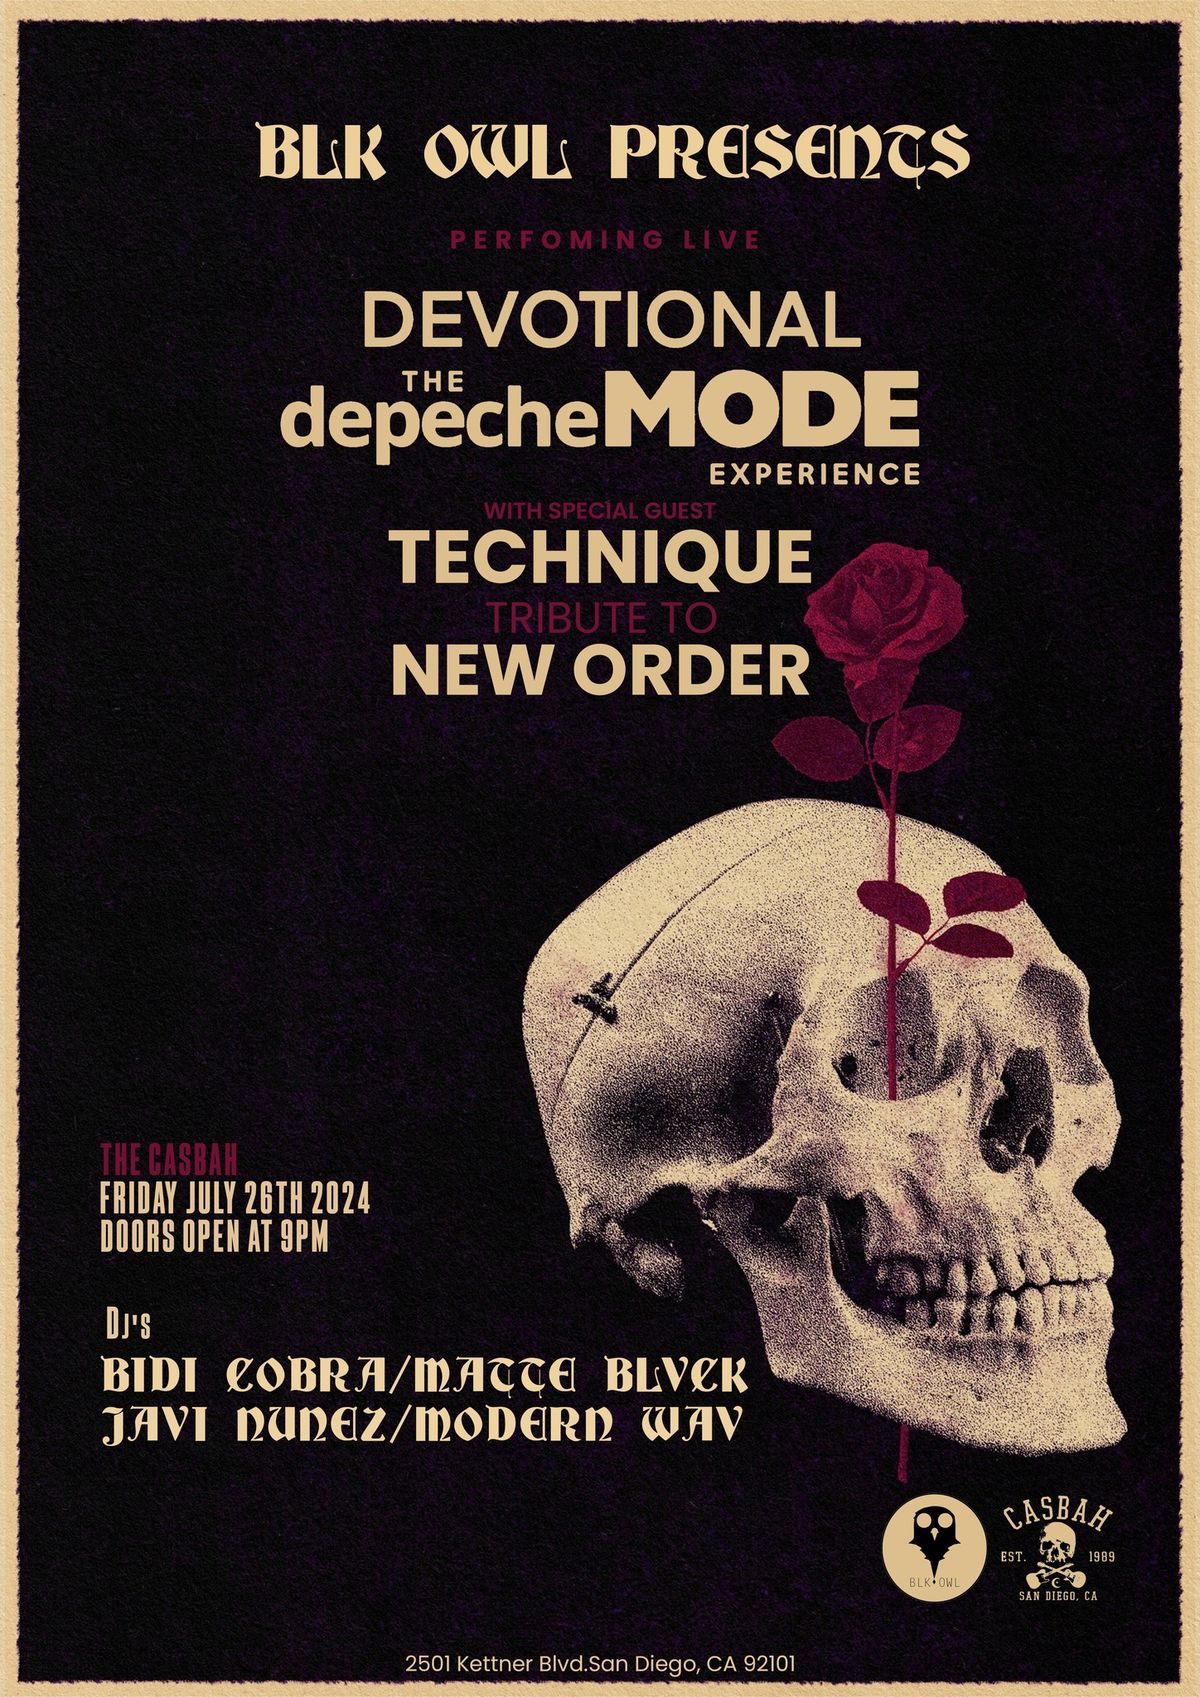 July 26th Devotional The Depeche MODE Experience & Technique New Order Casbah San Diego 